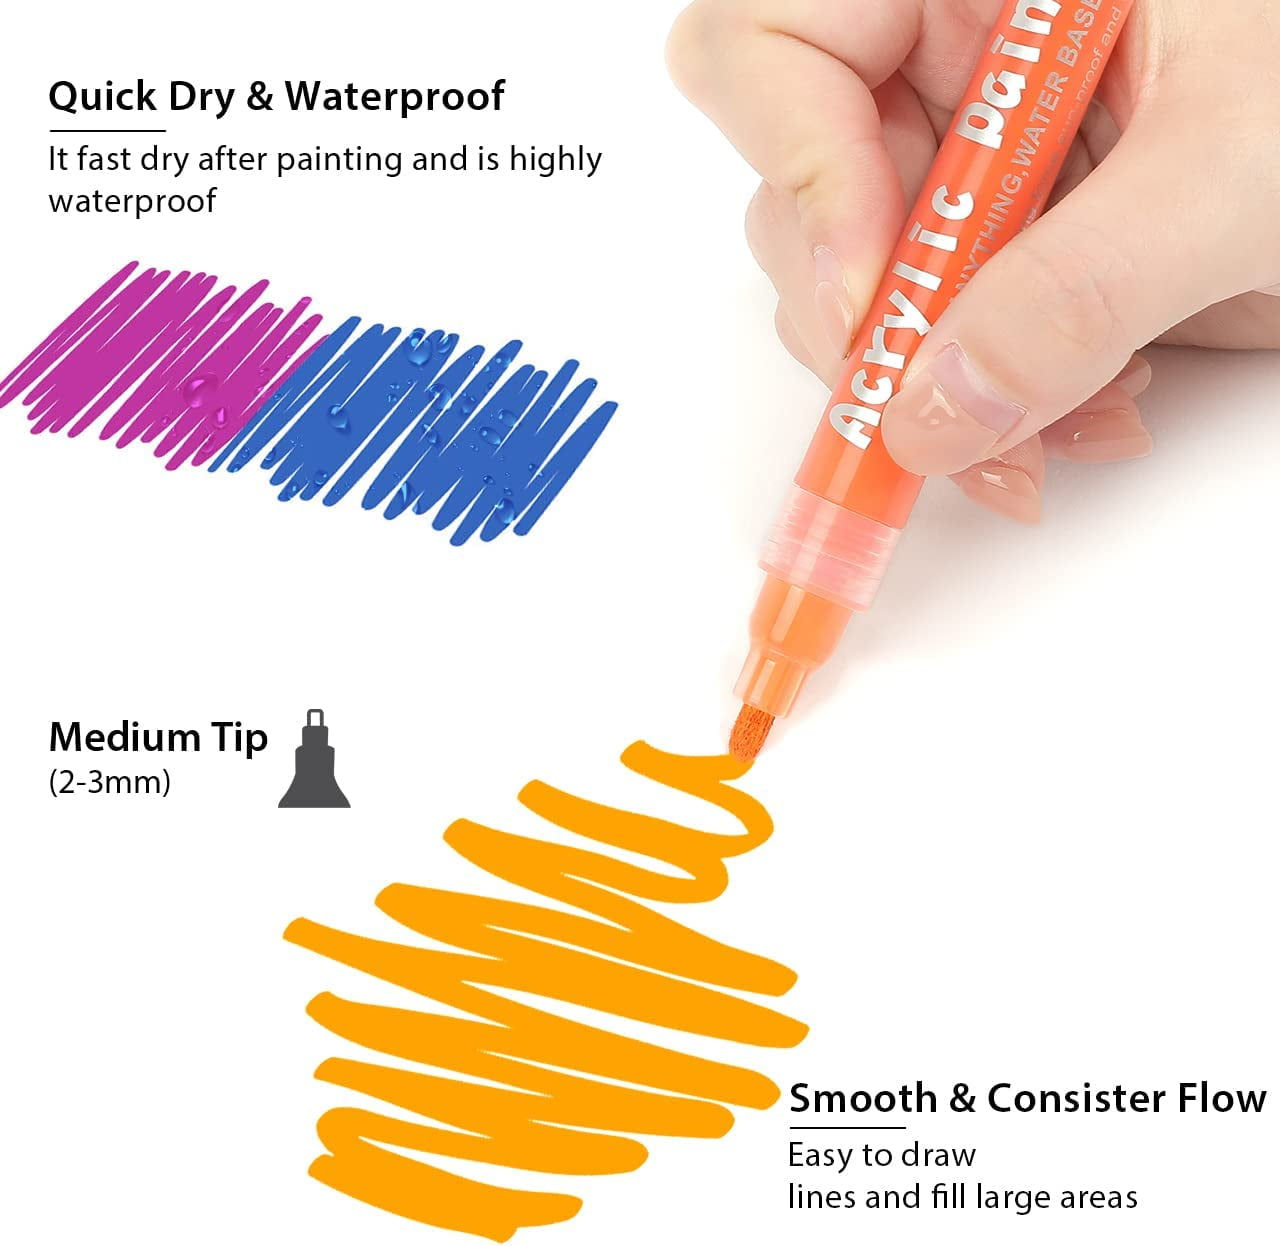 Eglyenlky Colored Markers for Adult Coloring Book, Felt Tip Marker, Dual  Tip Brush Pens with Brush and Fine Tip for Adult Teen Kid Coloring  Journaling